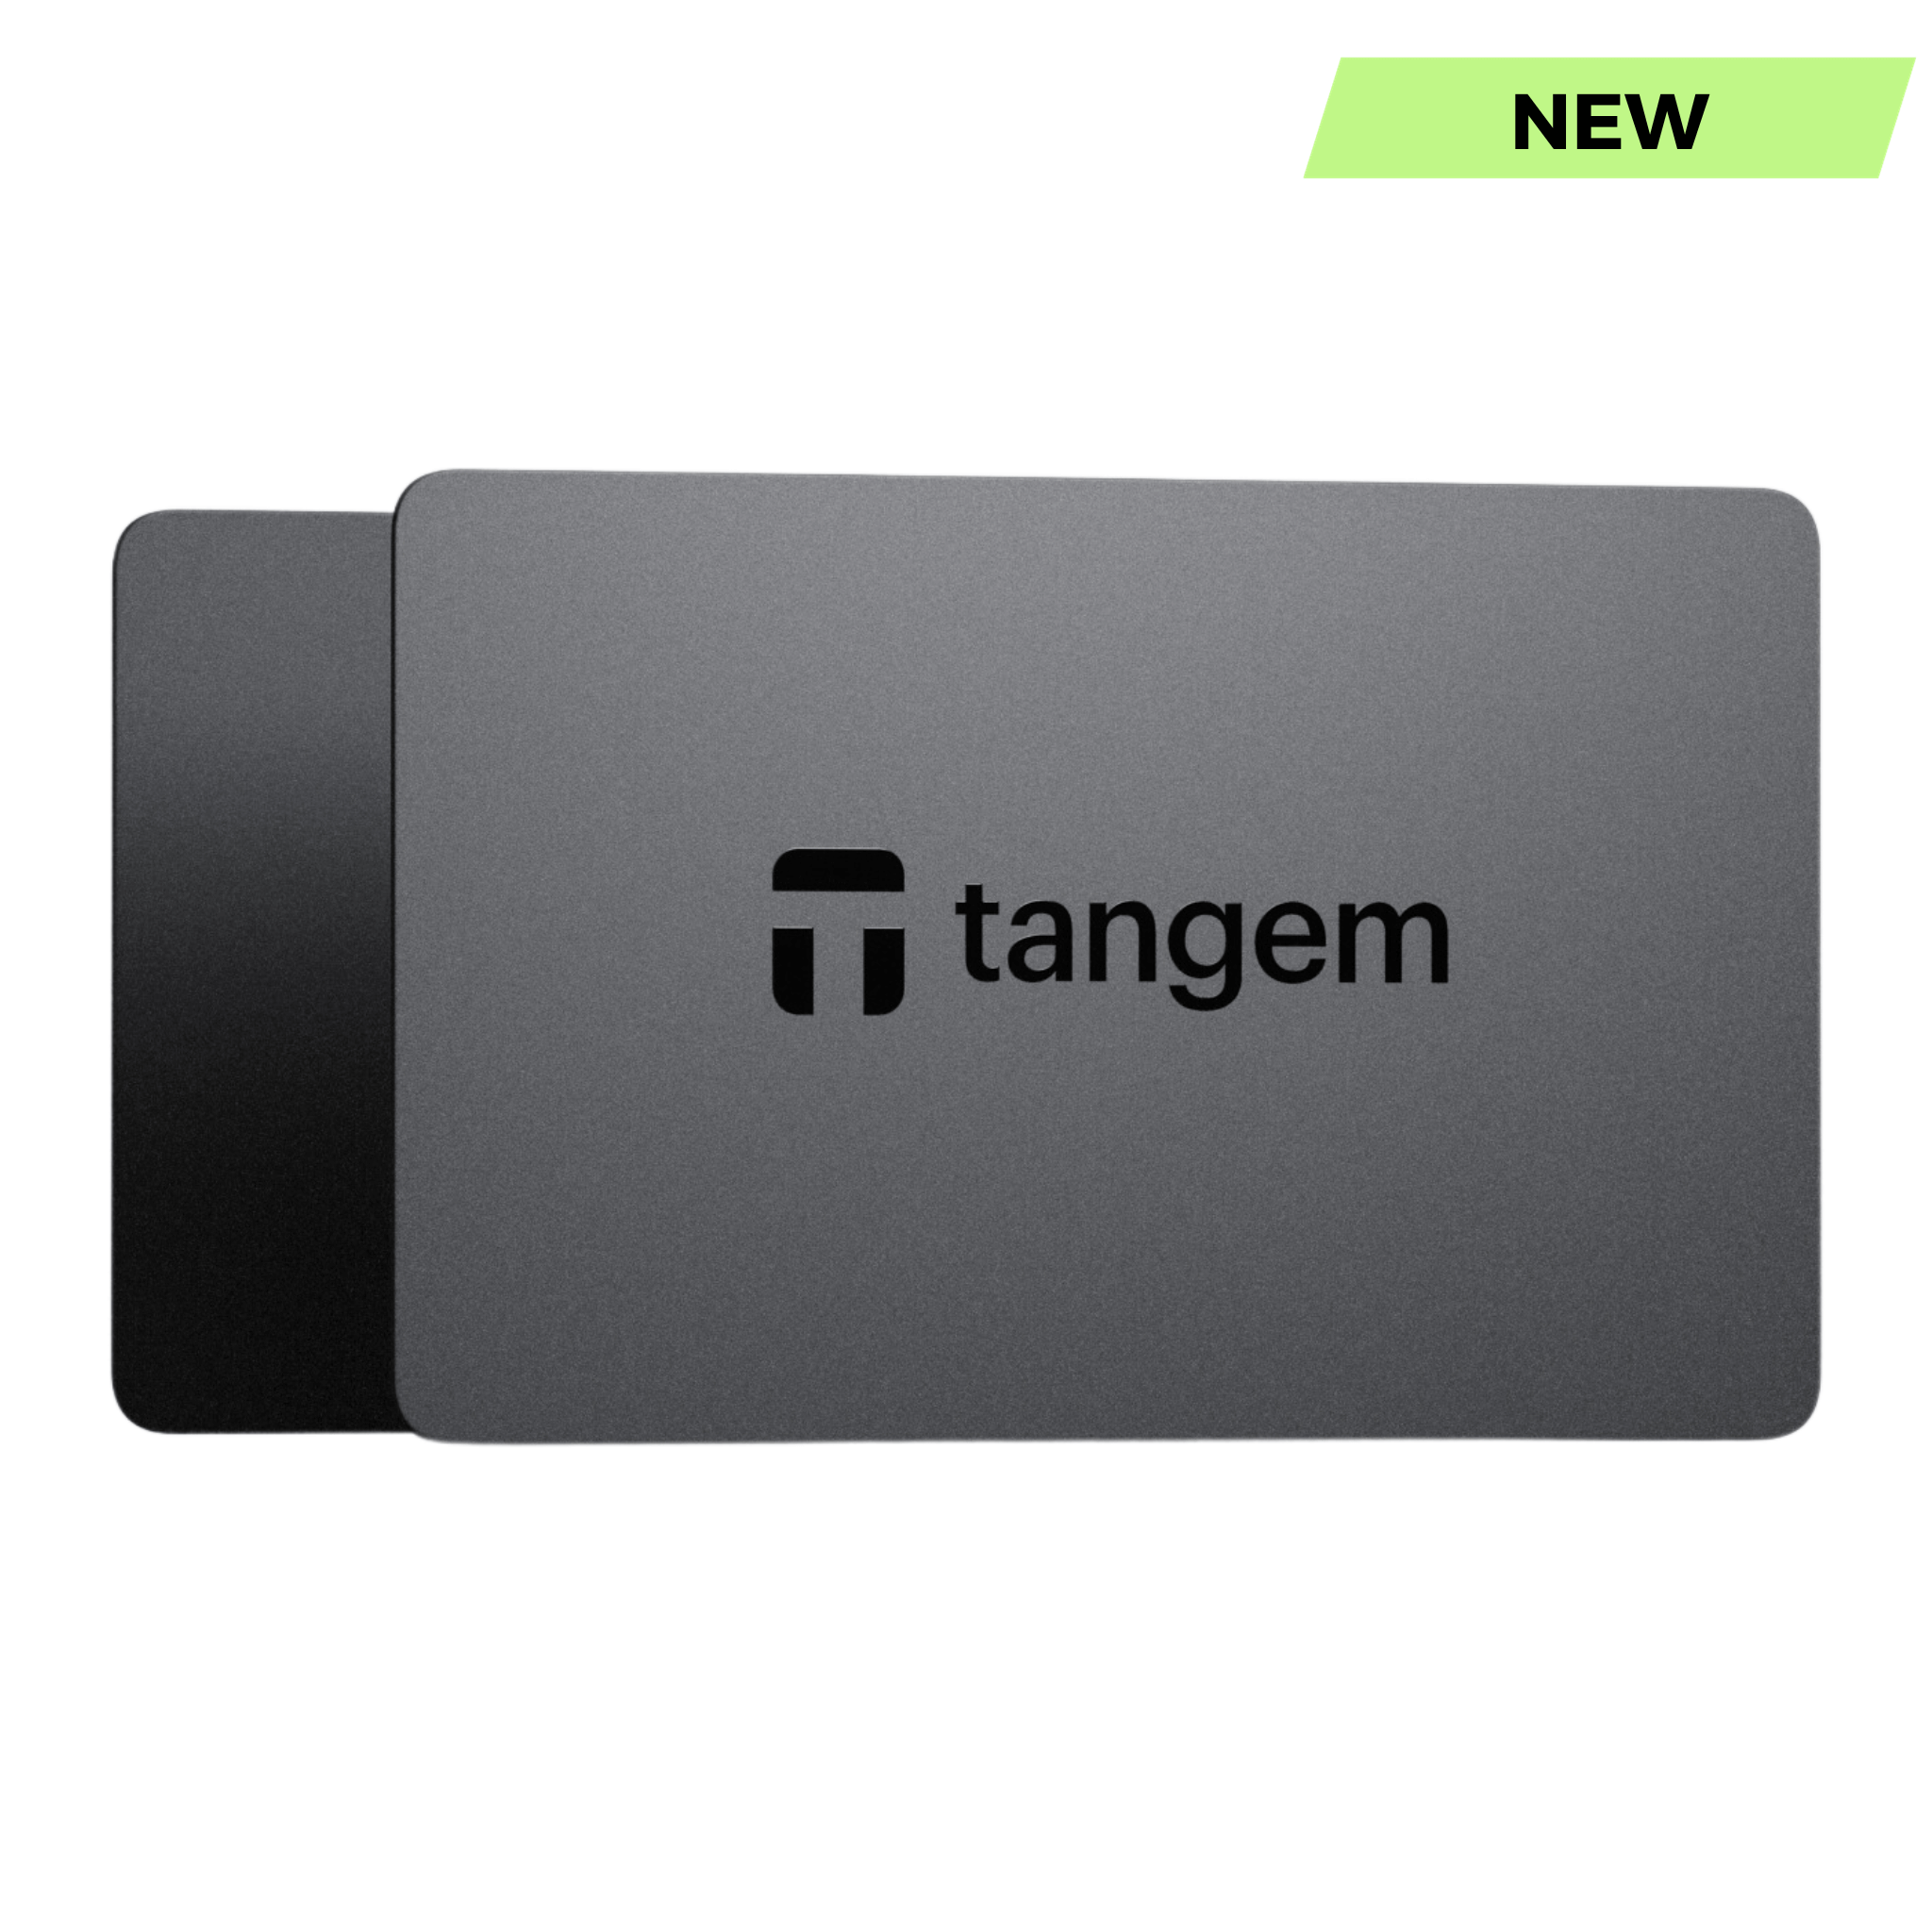 Tangem Wallet 2.0 2 Card Cryptocurrency Hardware Wallet New